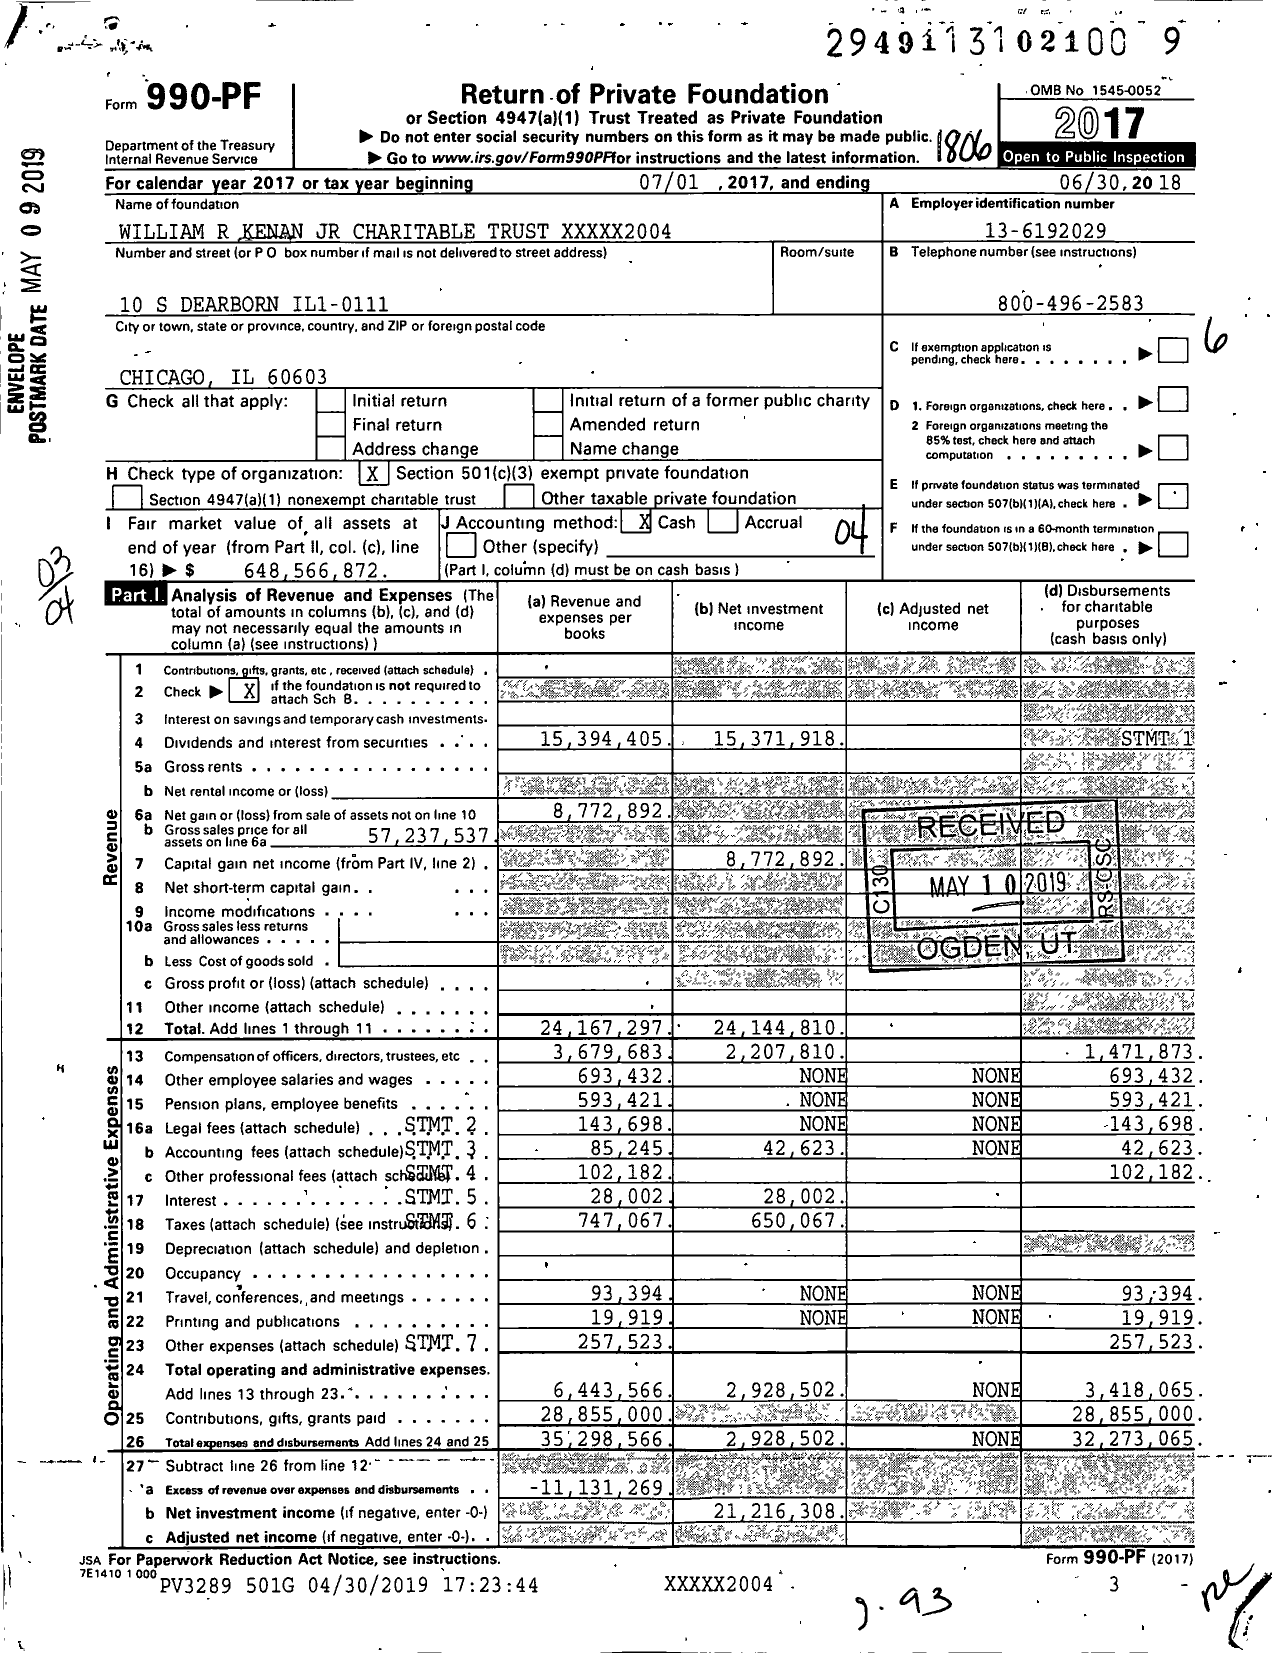 Image of first page of 2017 Form 990PF for William R. Kenan JR Charitable Trust